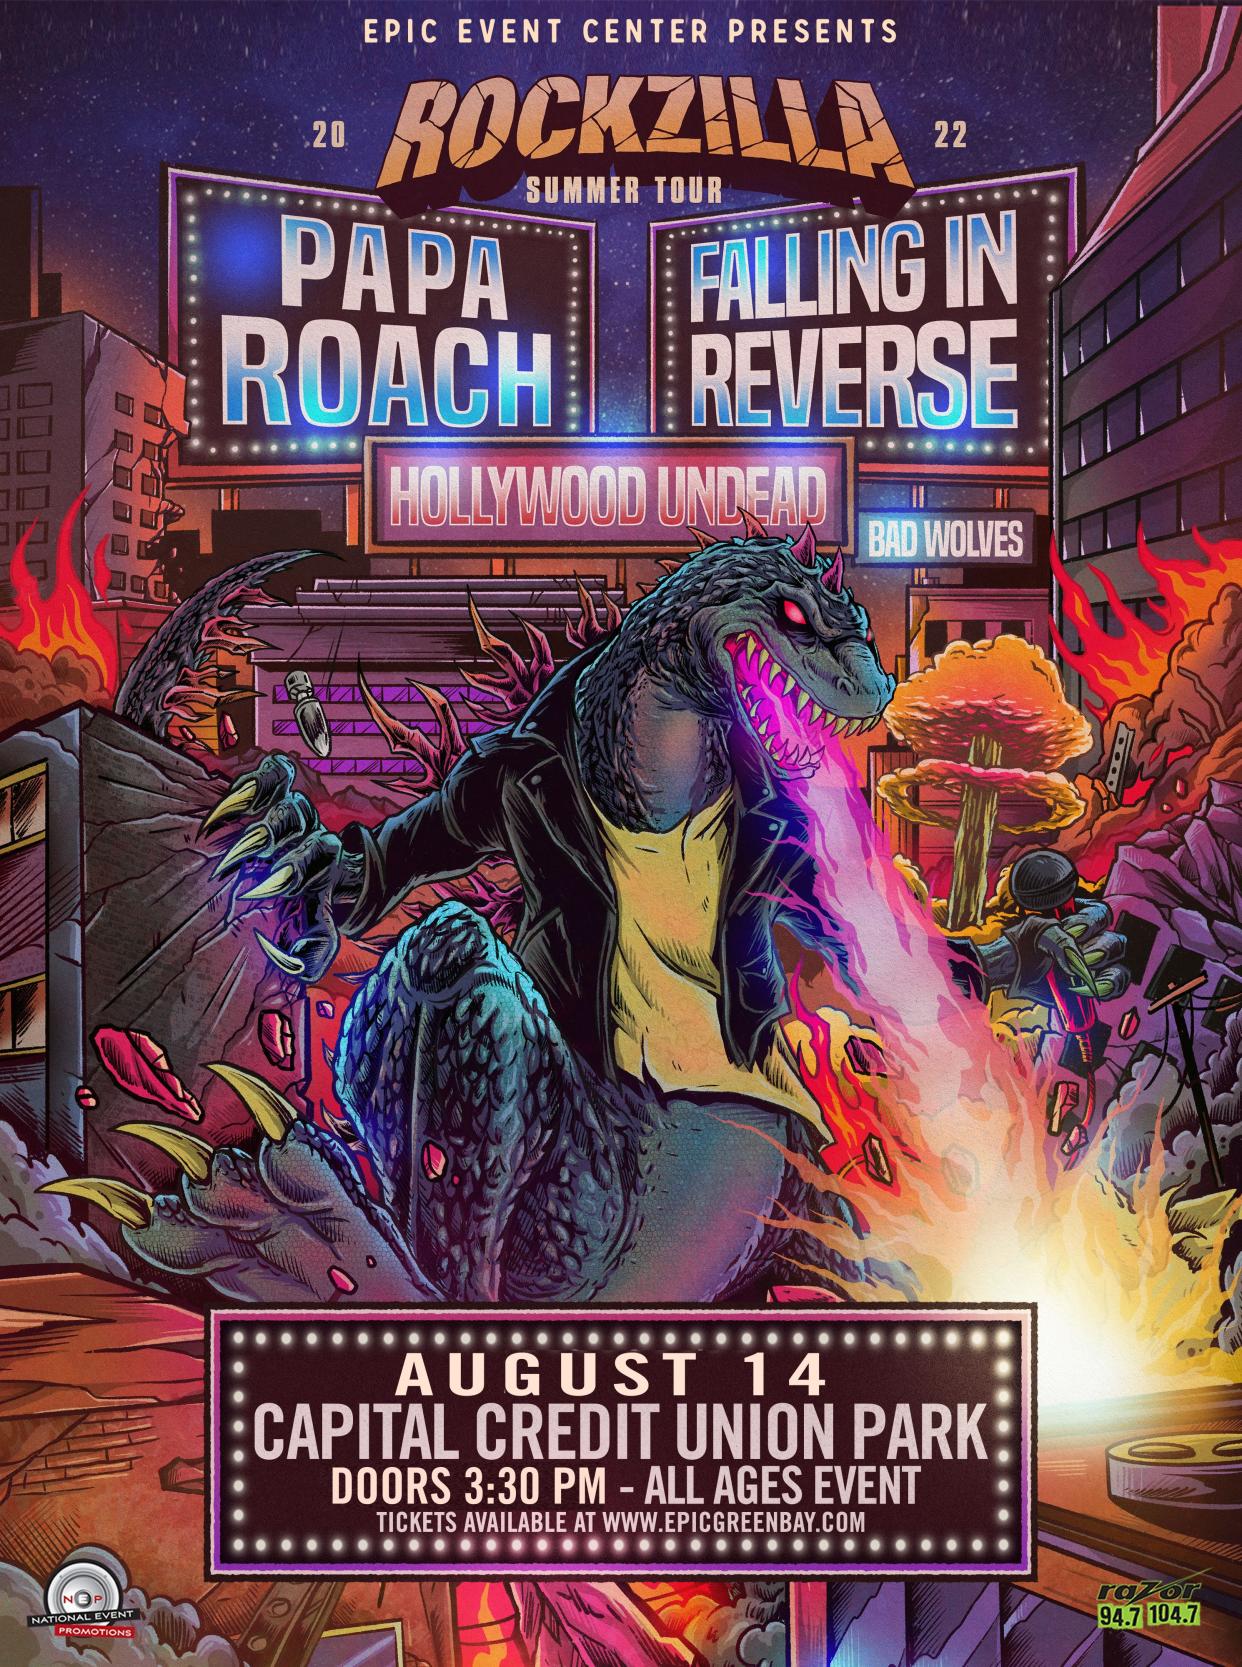 Papa Roach, Falling in Reverse, Bad Wolves and Hollywood Undead will perform Aug. 14 in Green Bay.